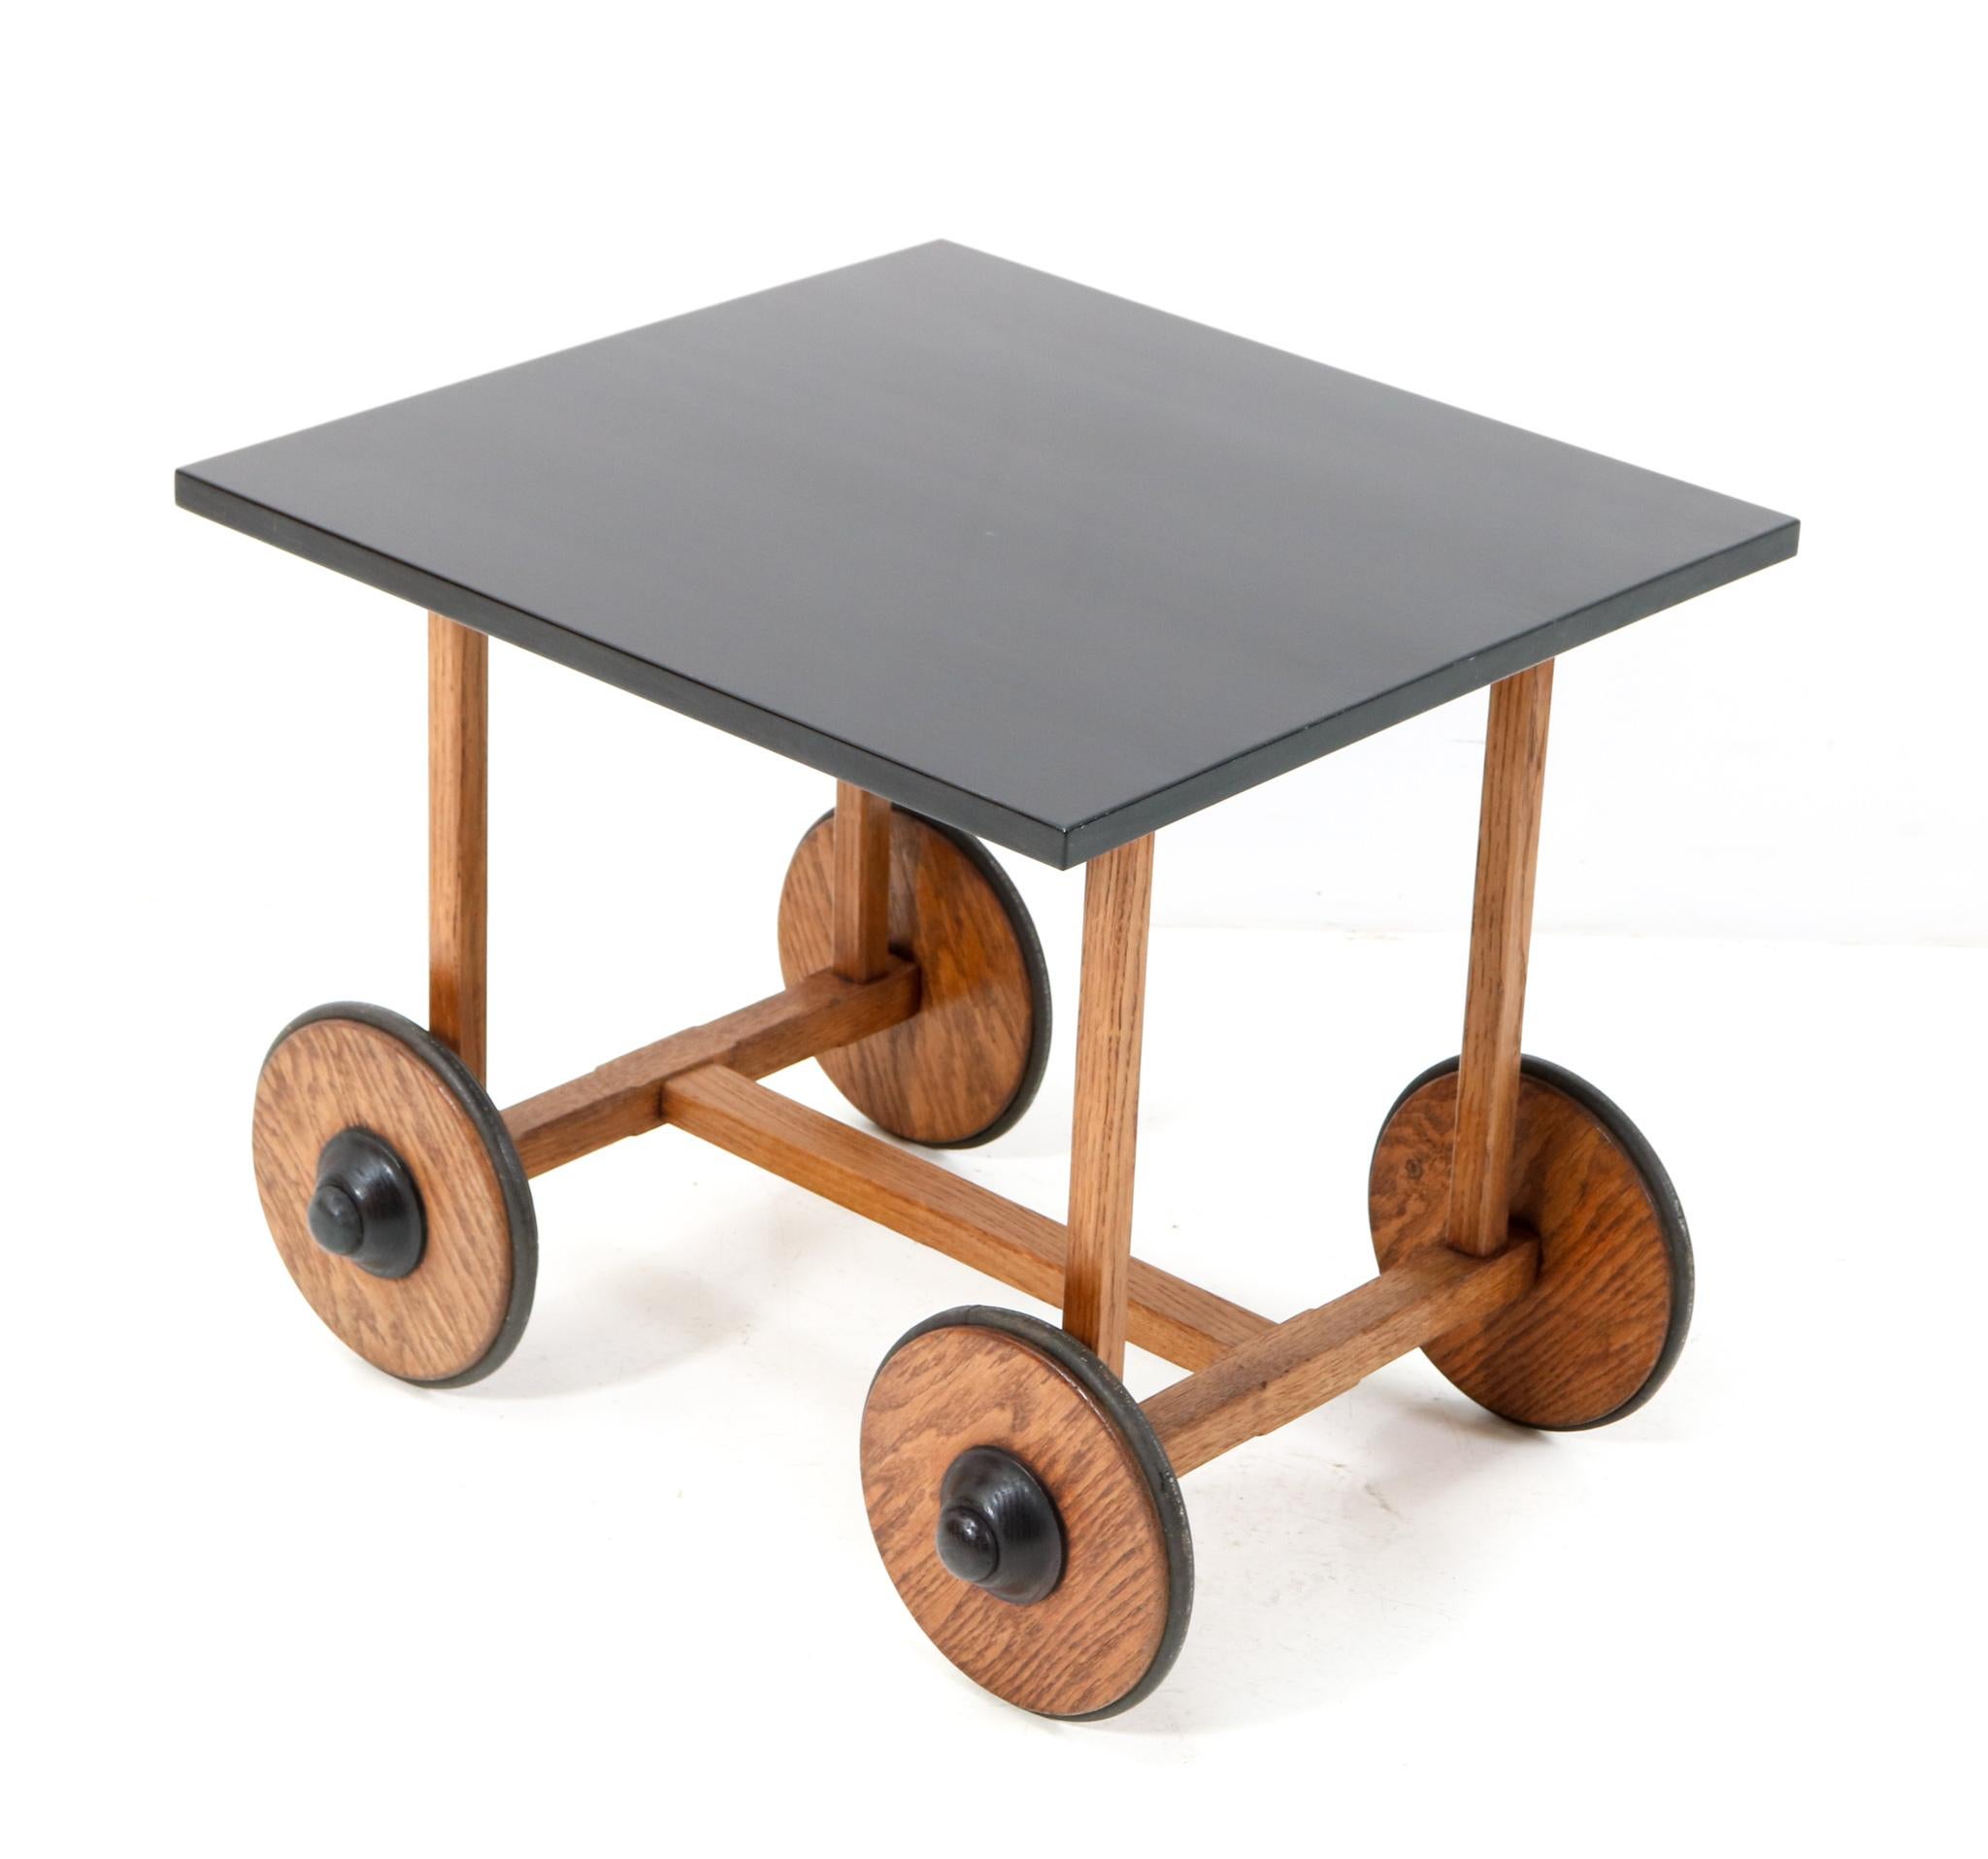 Magnificent and ultra rare Art Deco Modernist serving cart or trolley. Striking Dutch design from the 1930s. Solid oak frame and wheels with original refinished black lacquered beech top. All four wheels are in good working order. This wonderful Art